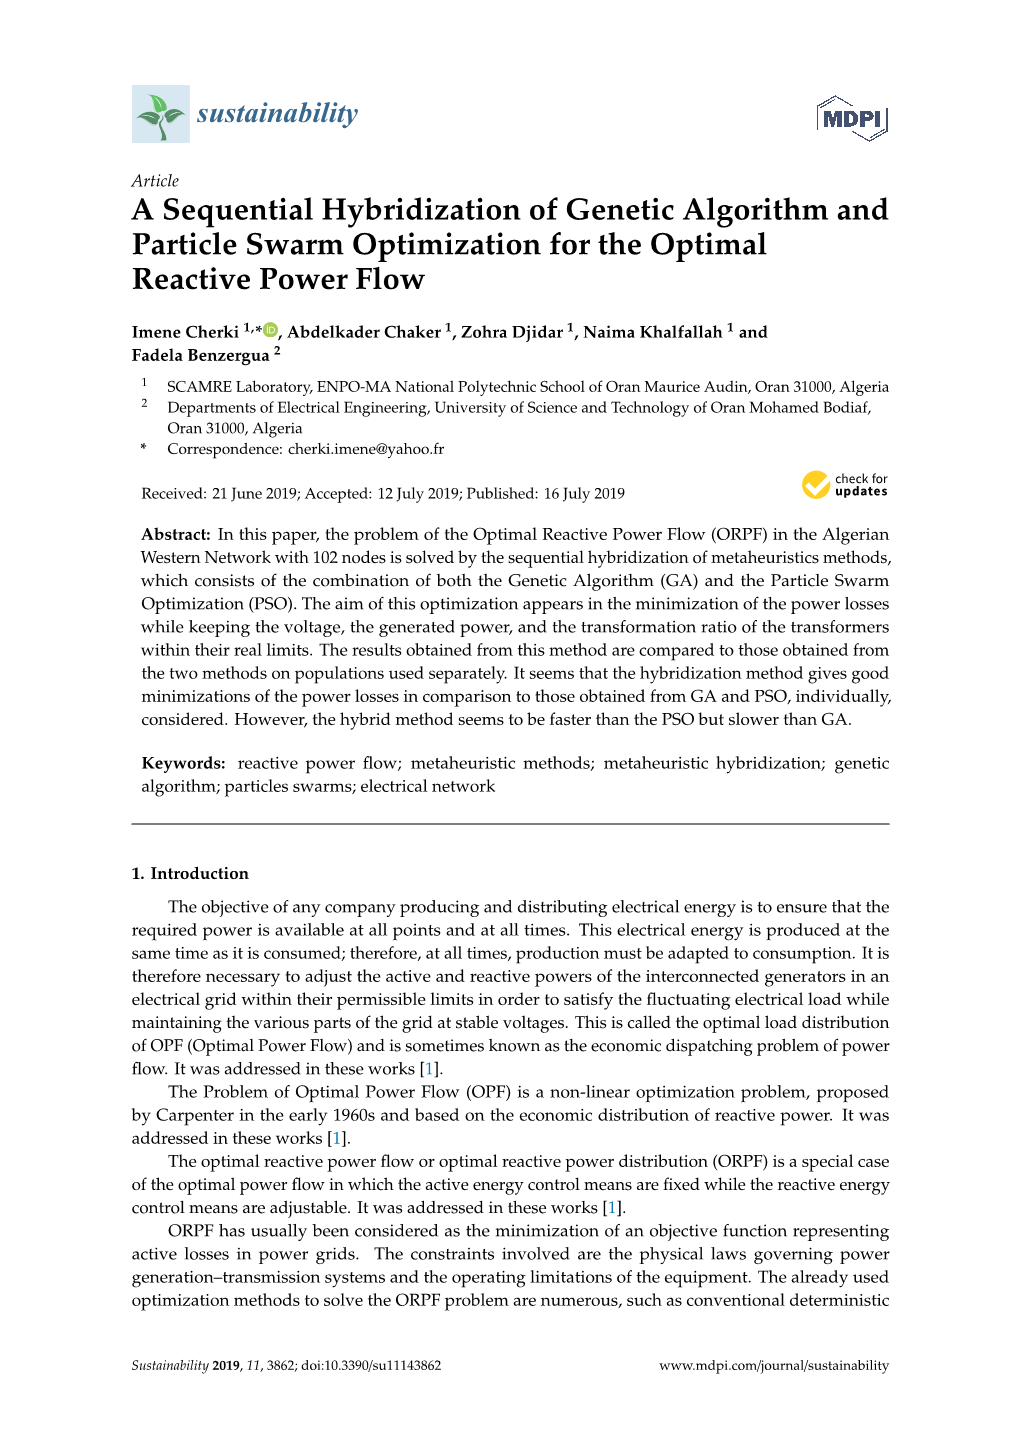 A Sequential Hybridization of Genetic Algorithm and Particle Swarm Optimization for the Optimal Reactive Power Flow